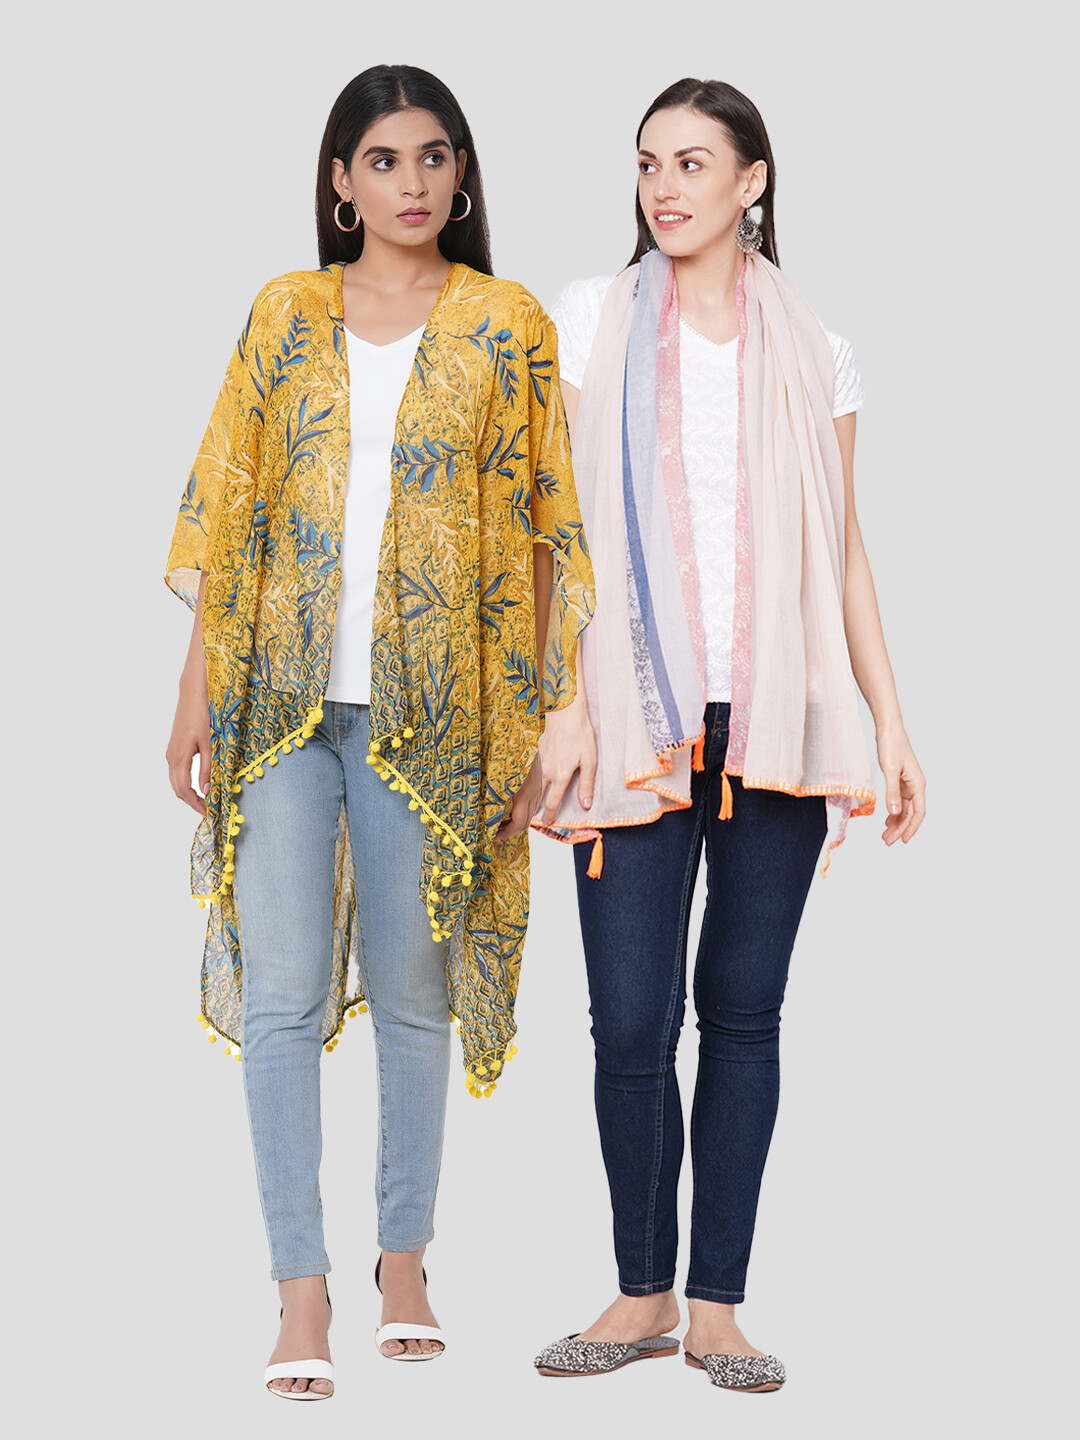 Stylist Printed Ponchos & Printed Scarf with Crochet- Combo offer